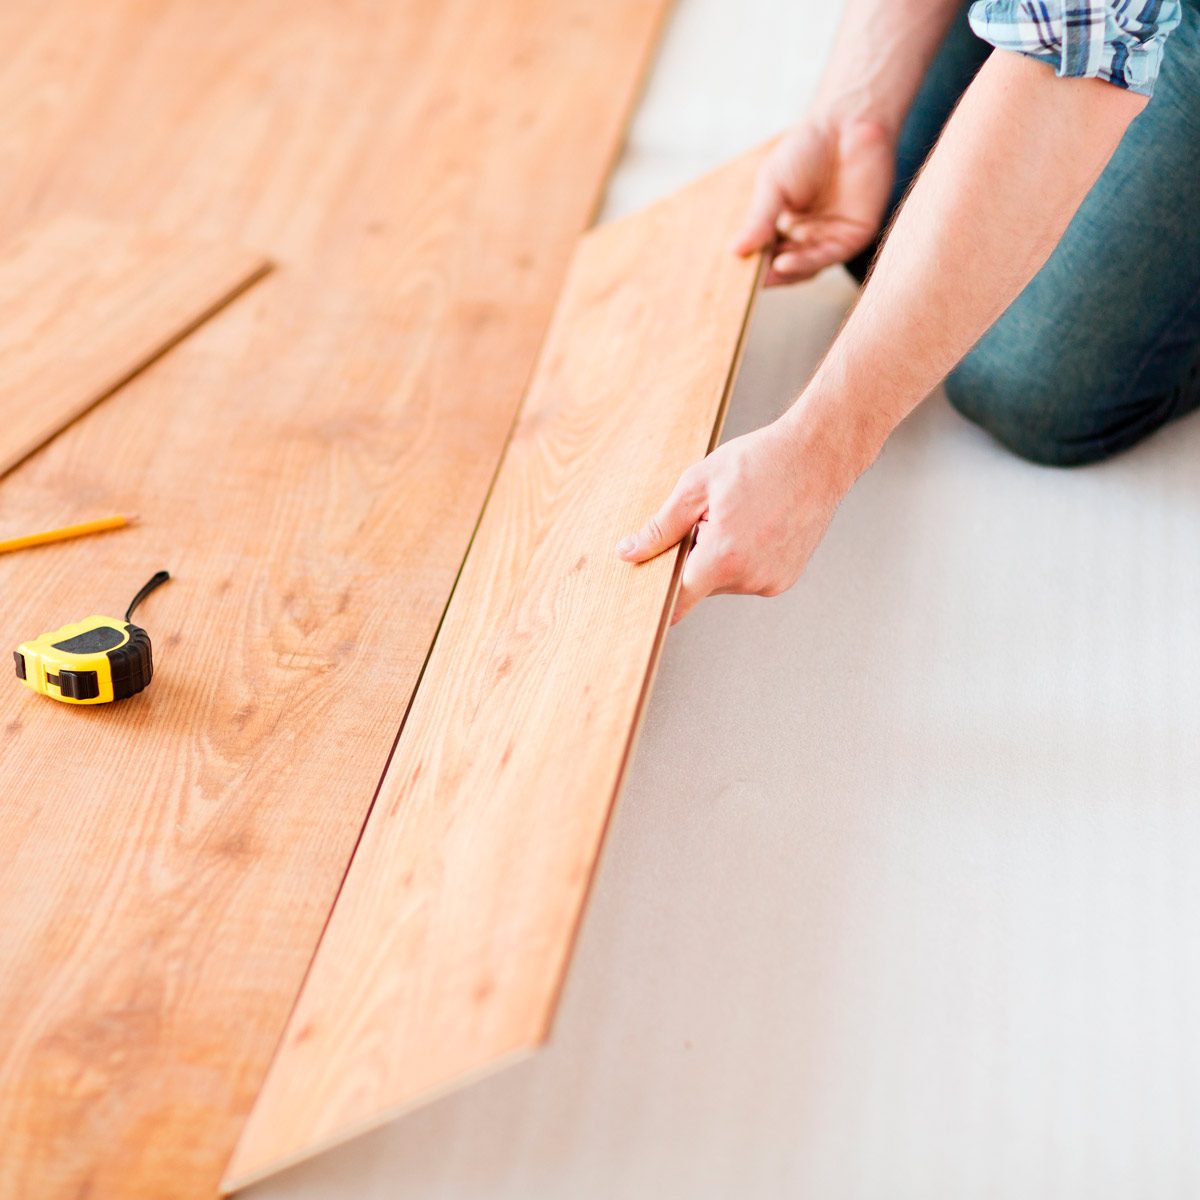 This is the Absolute Best Flooring for Increasing Home Value